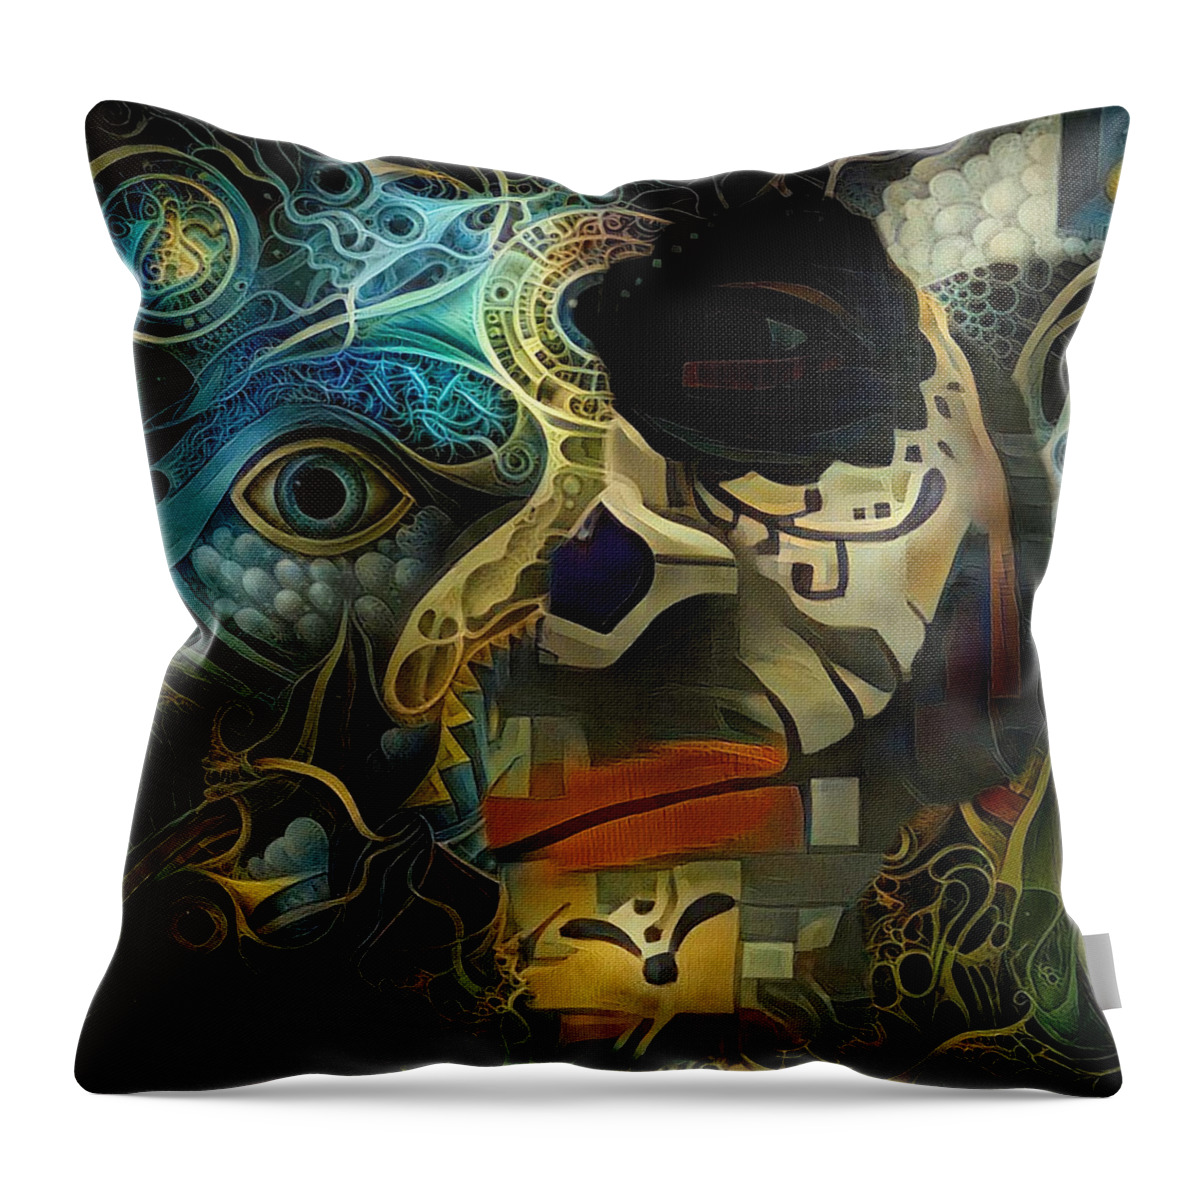 Painting Throw Pillow featuring the digital art Masquerade by Bruce Rolff